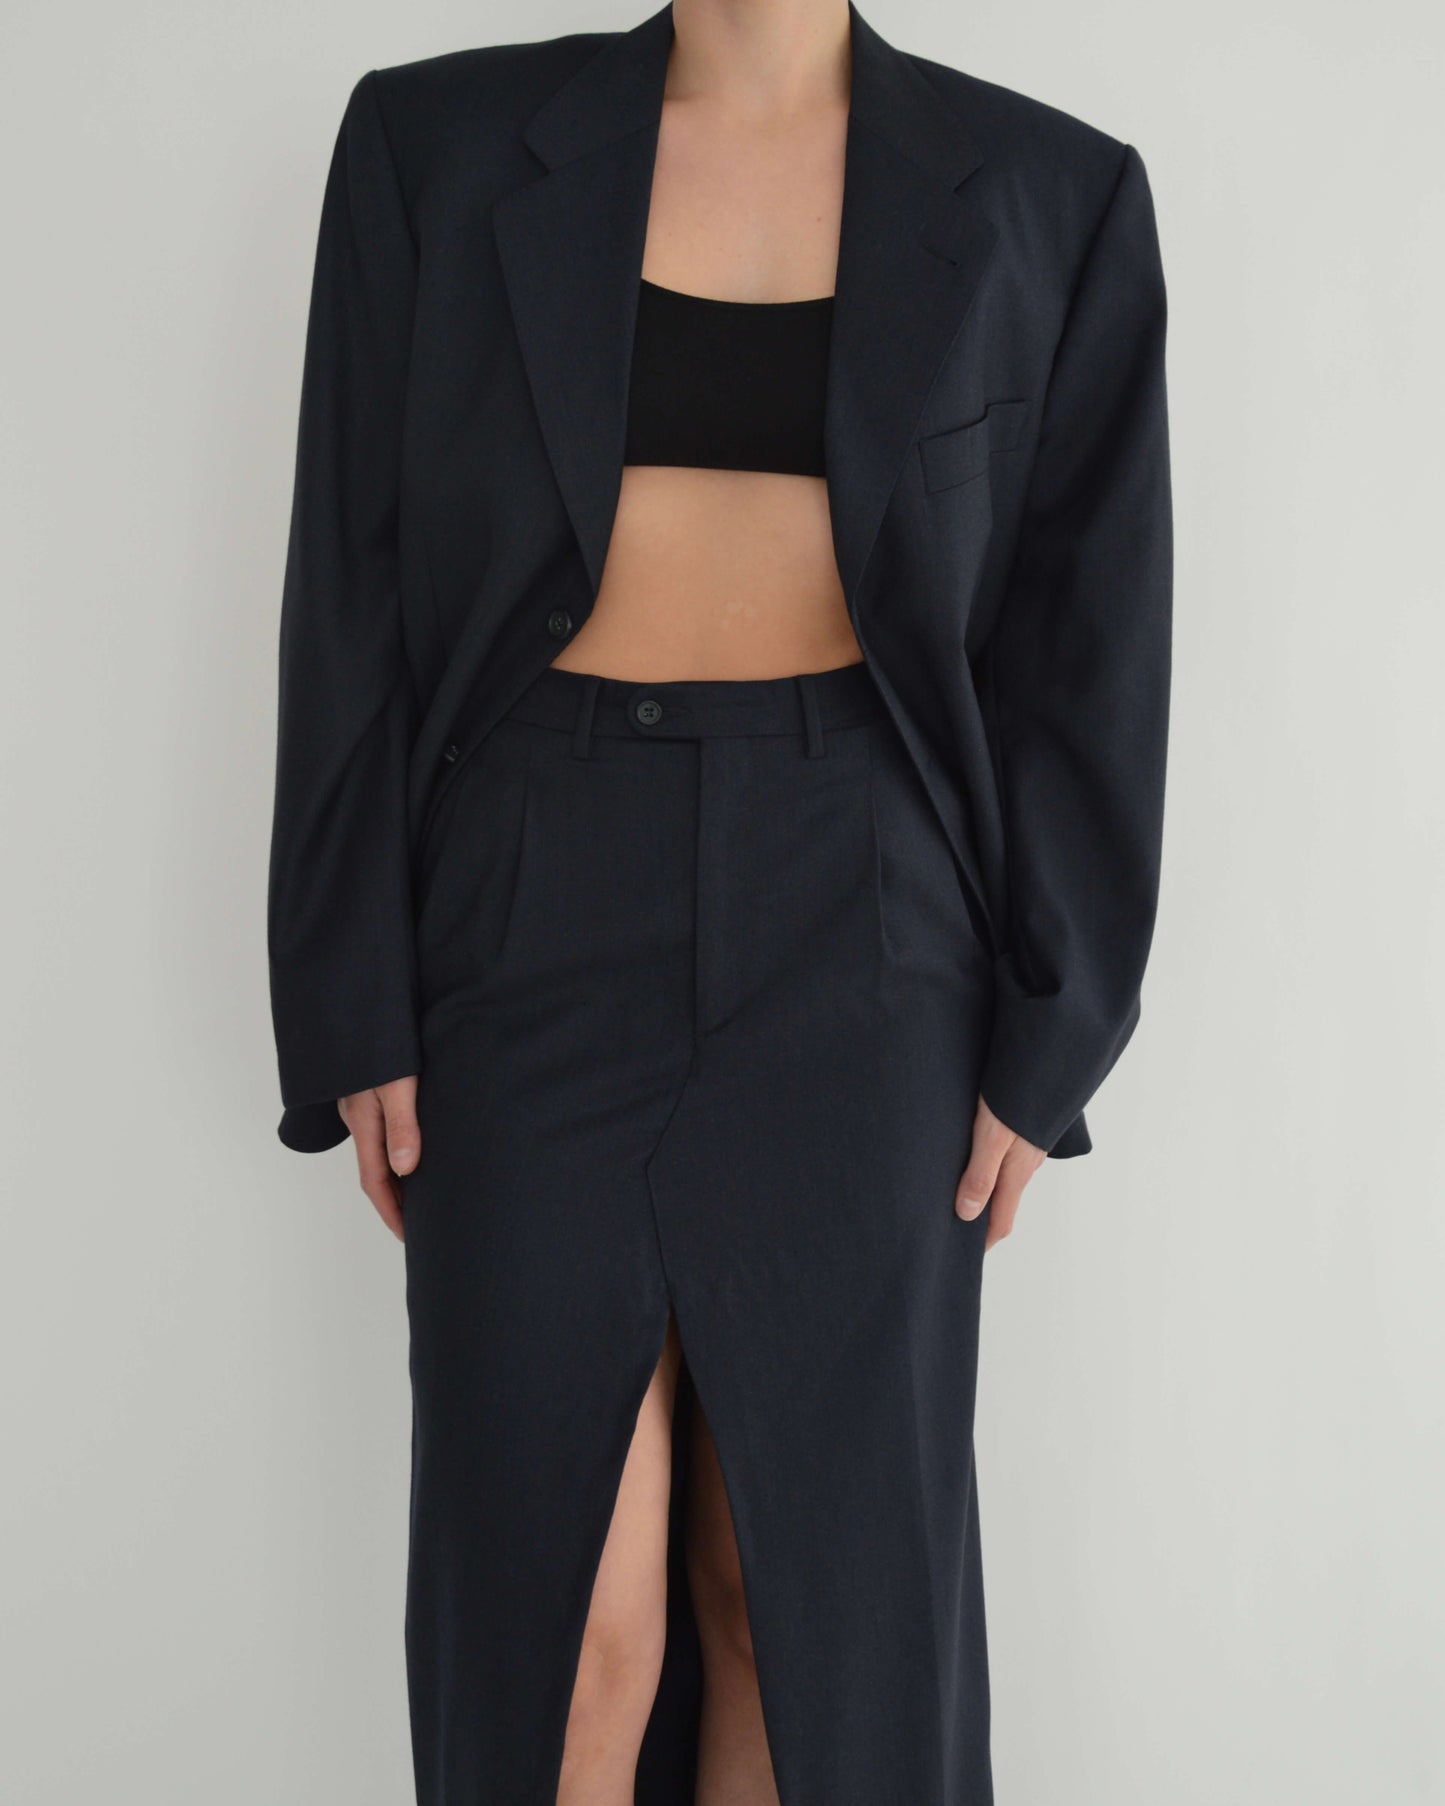 Skirt Suit - Marbeled Navy (S/M)